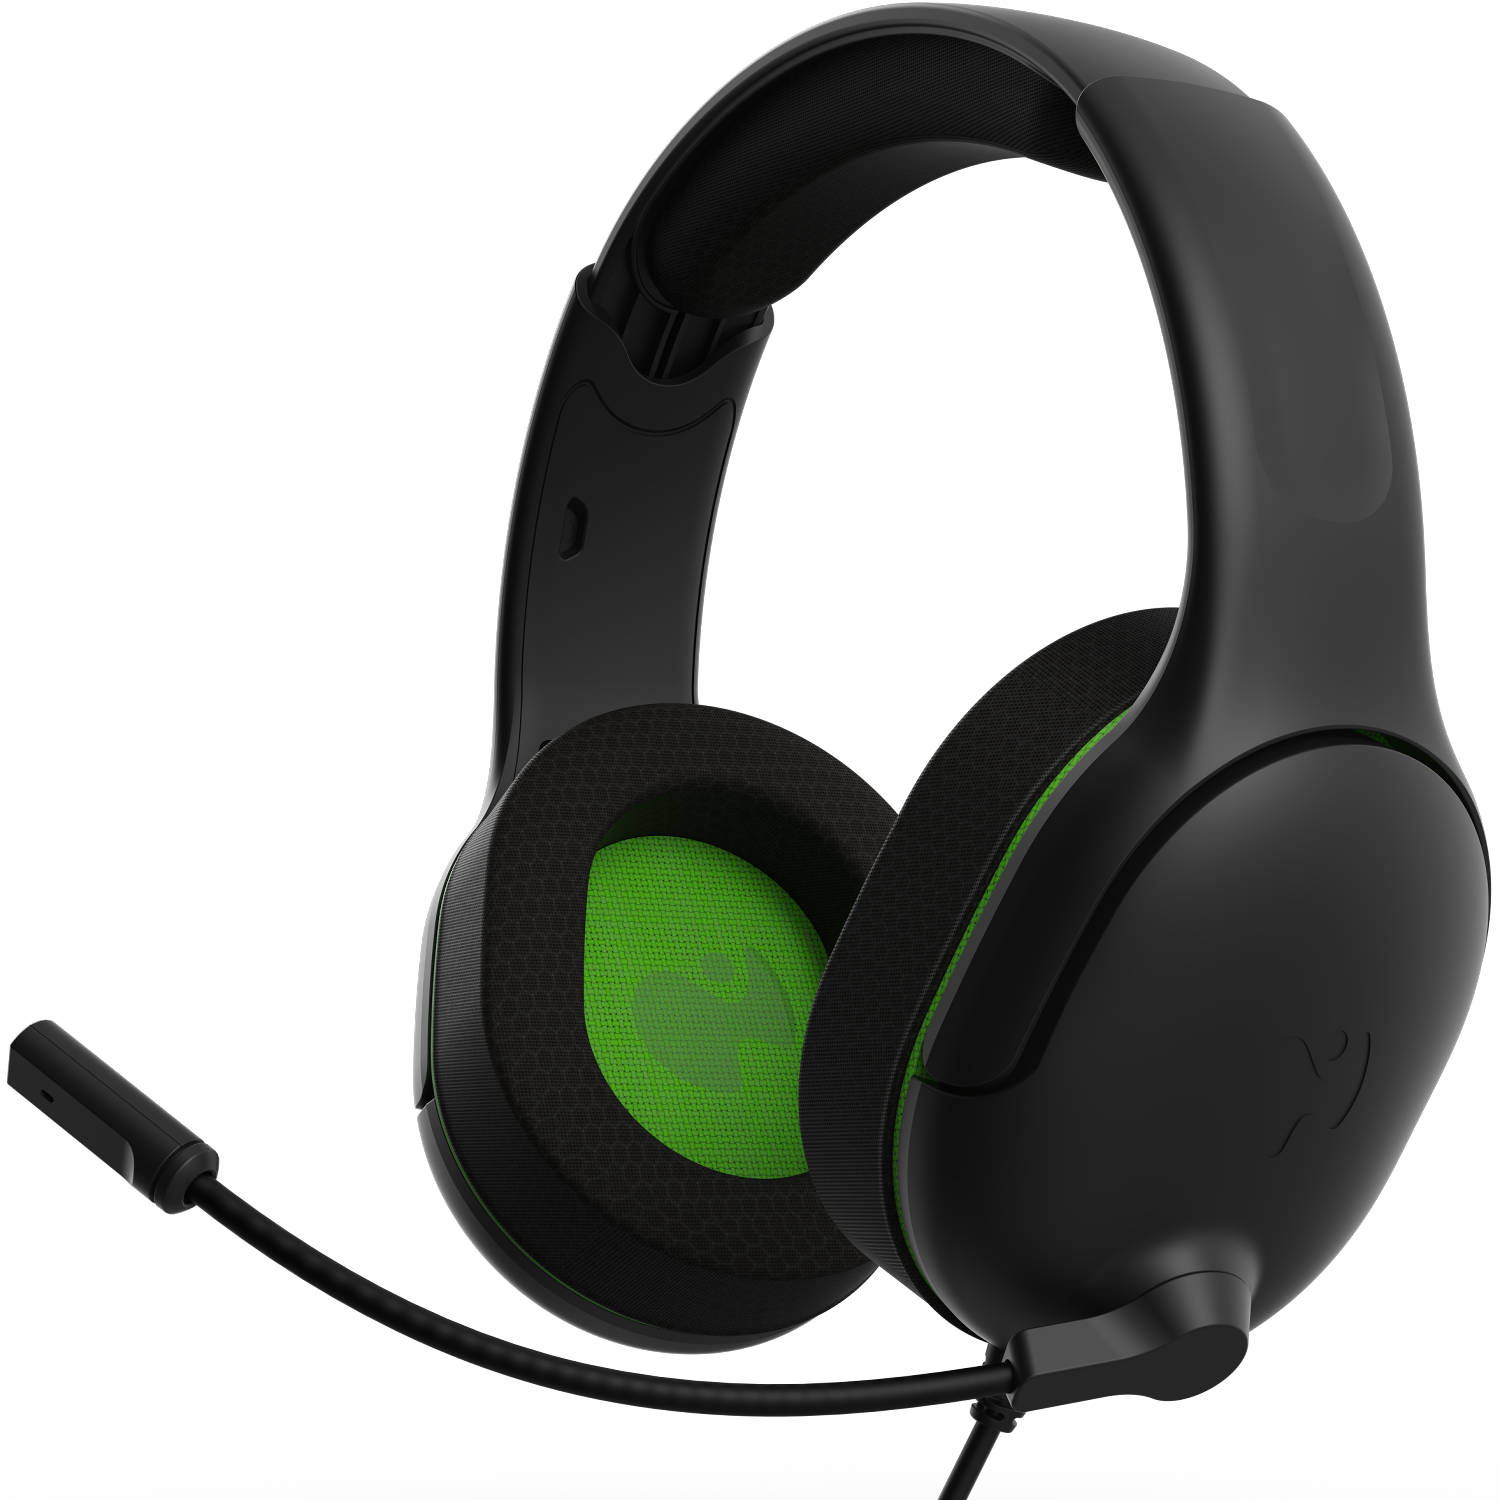 Wired Stereo Headset for Xbox Series X